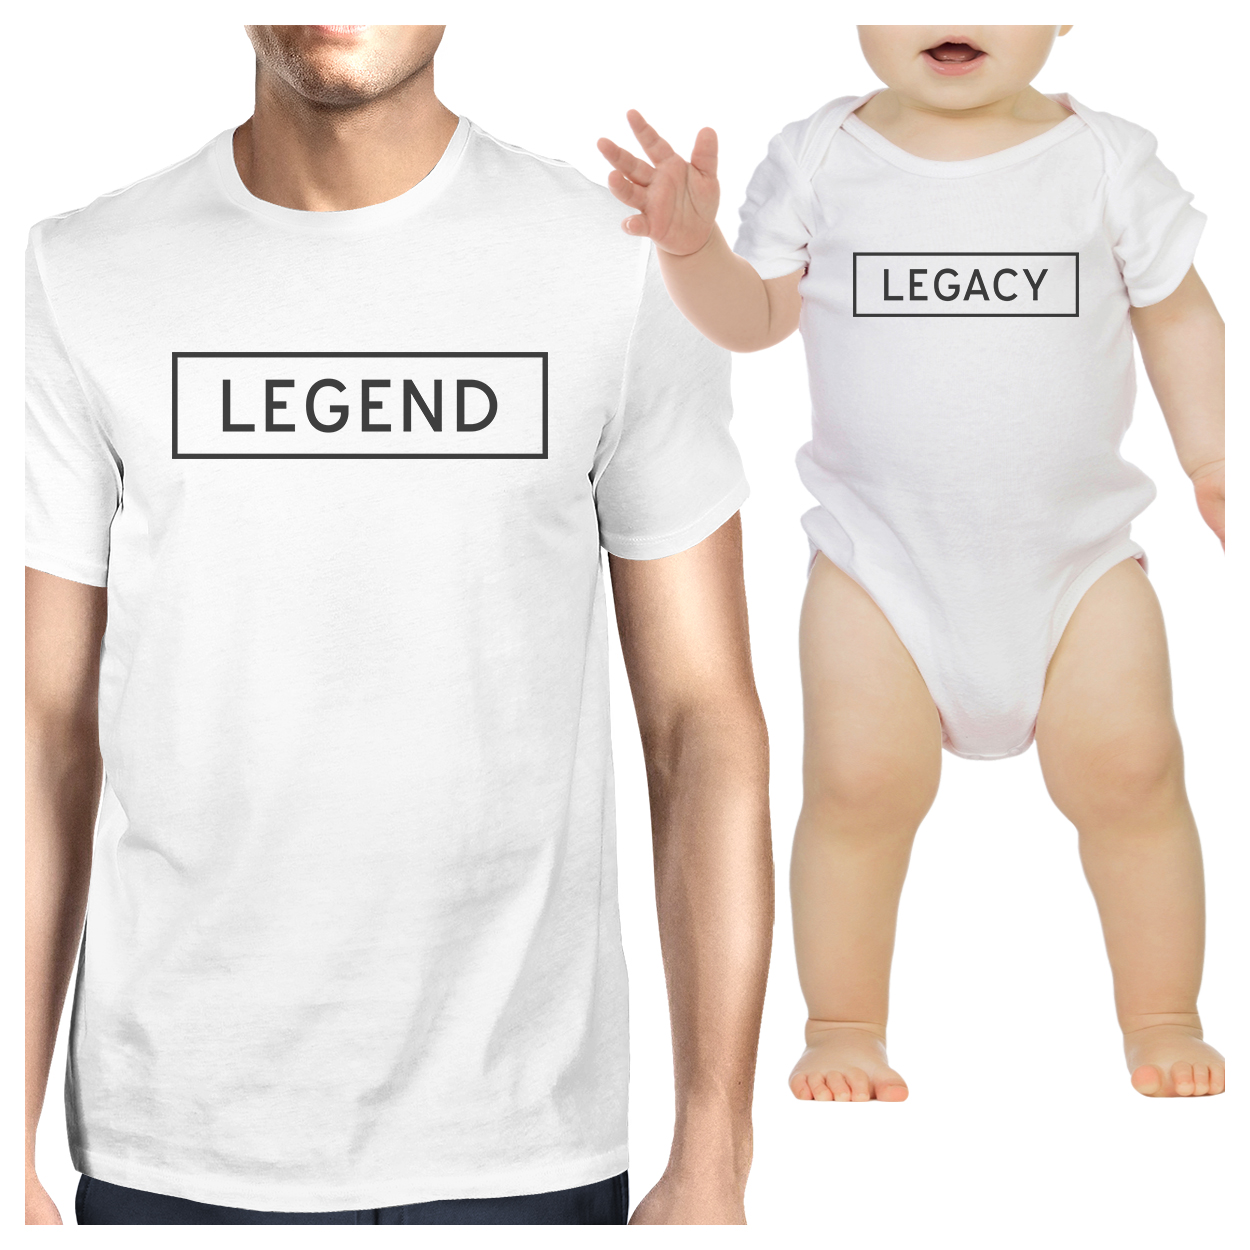 Legend Legacy White Dad Baby Funny Matching Graphic Tops Cute Gifts - image 1 of 5